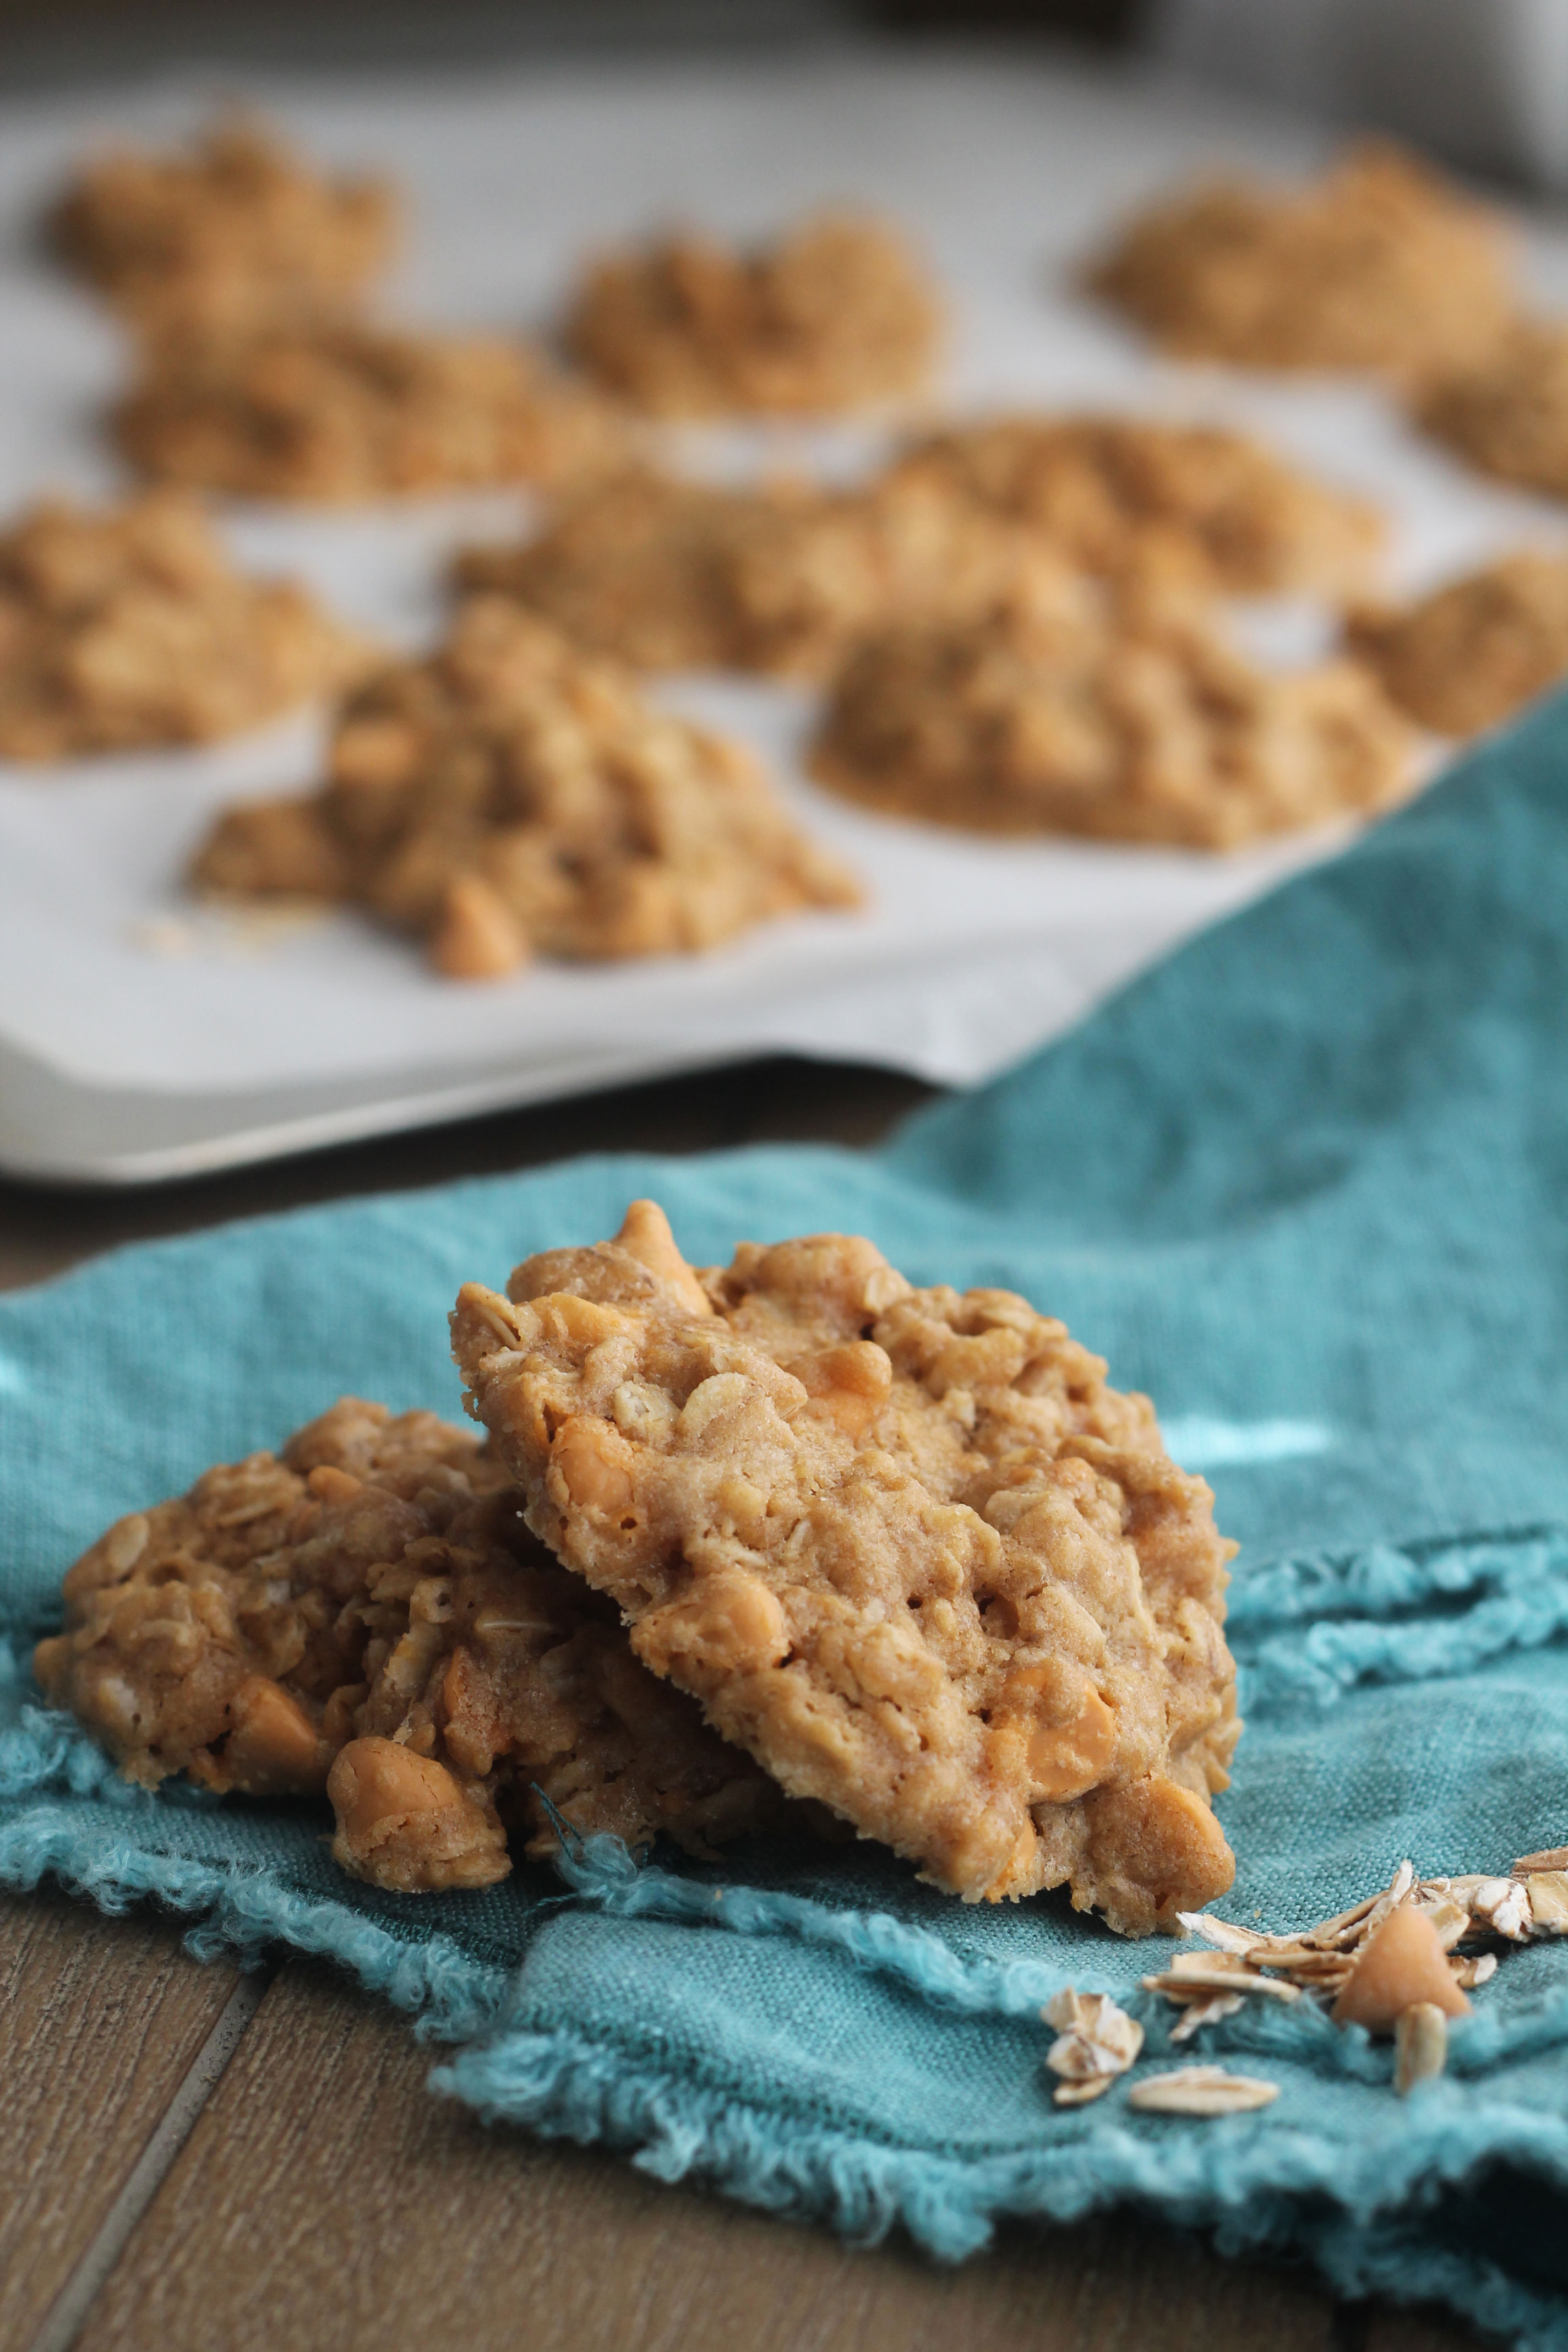 If you love the classic Oatmeal Cookies and like butterscotch then you will want to try these cookies out!